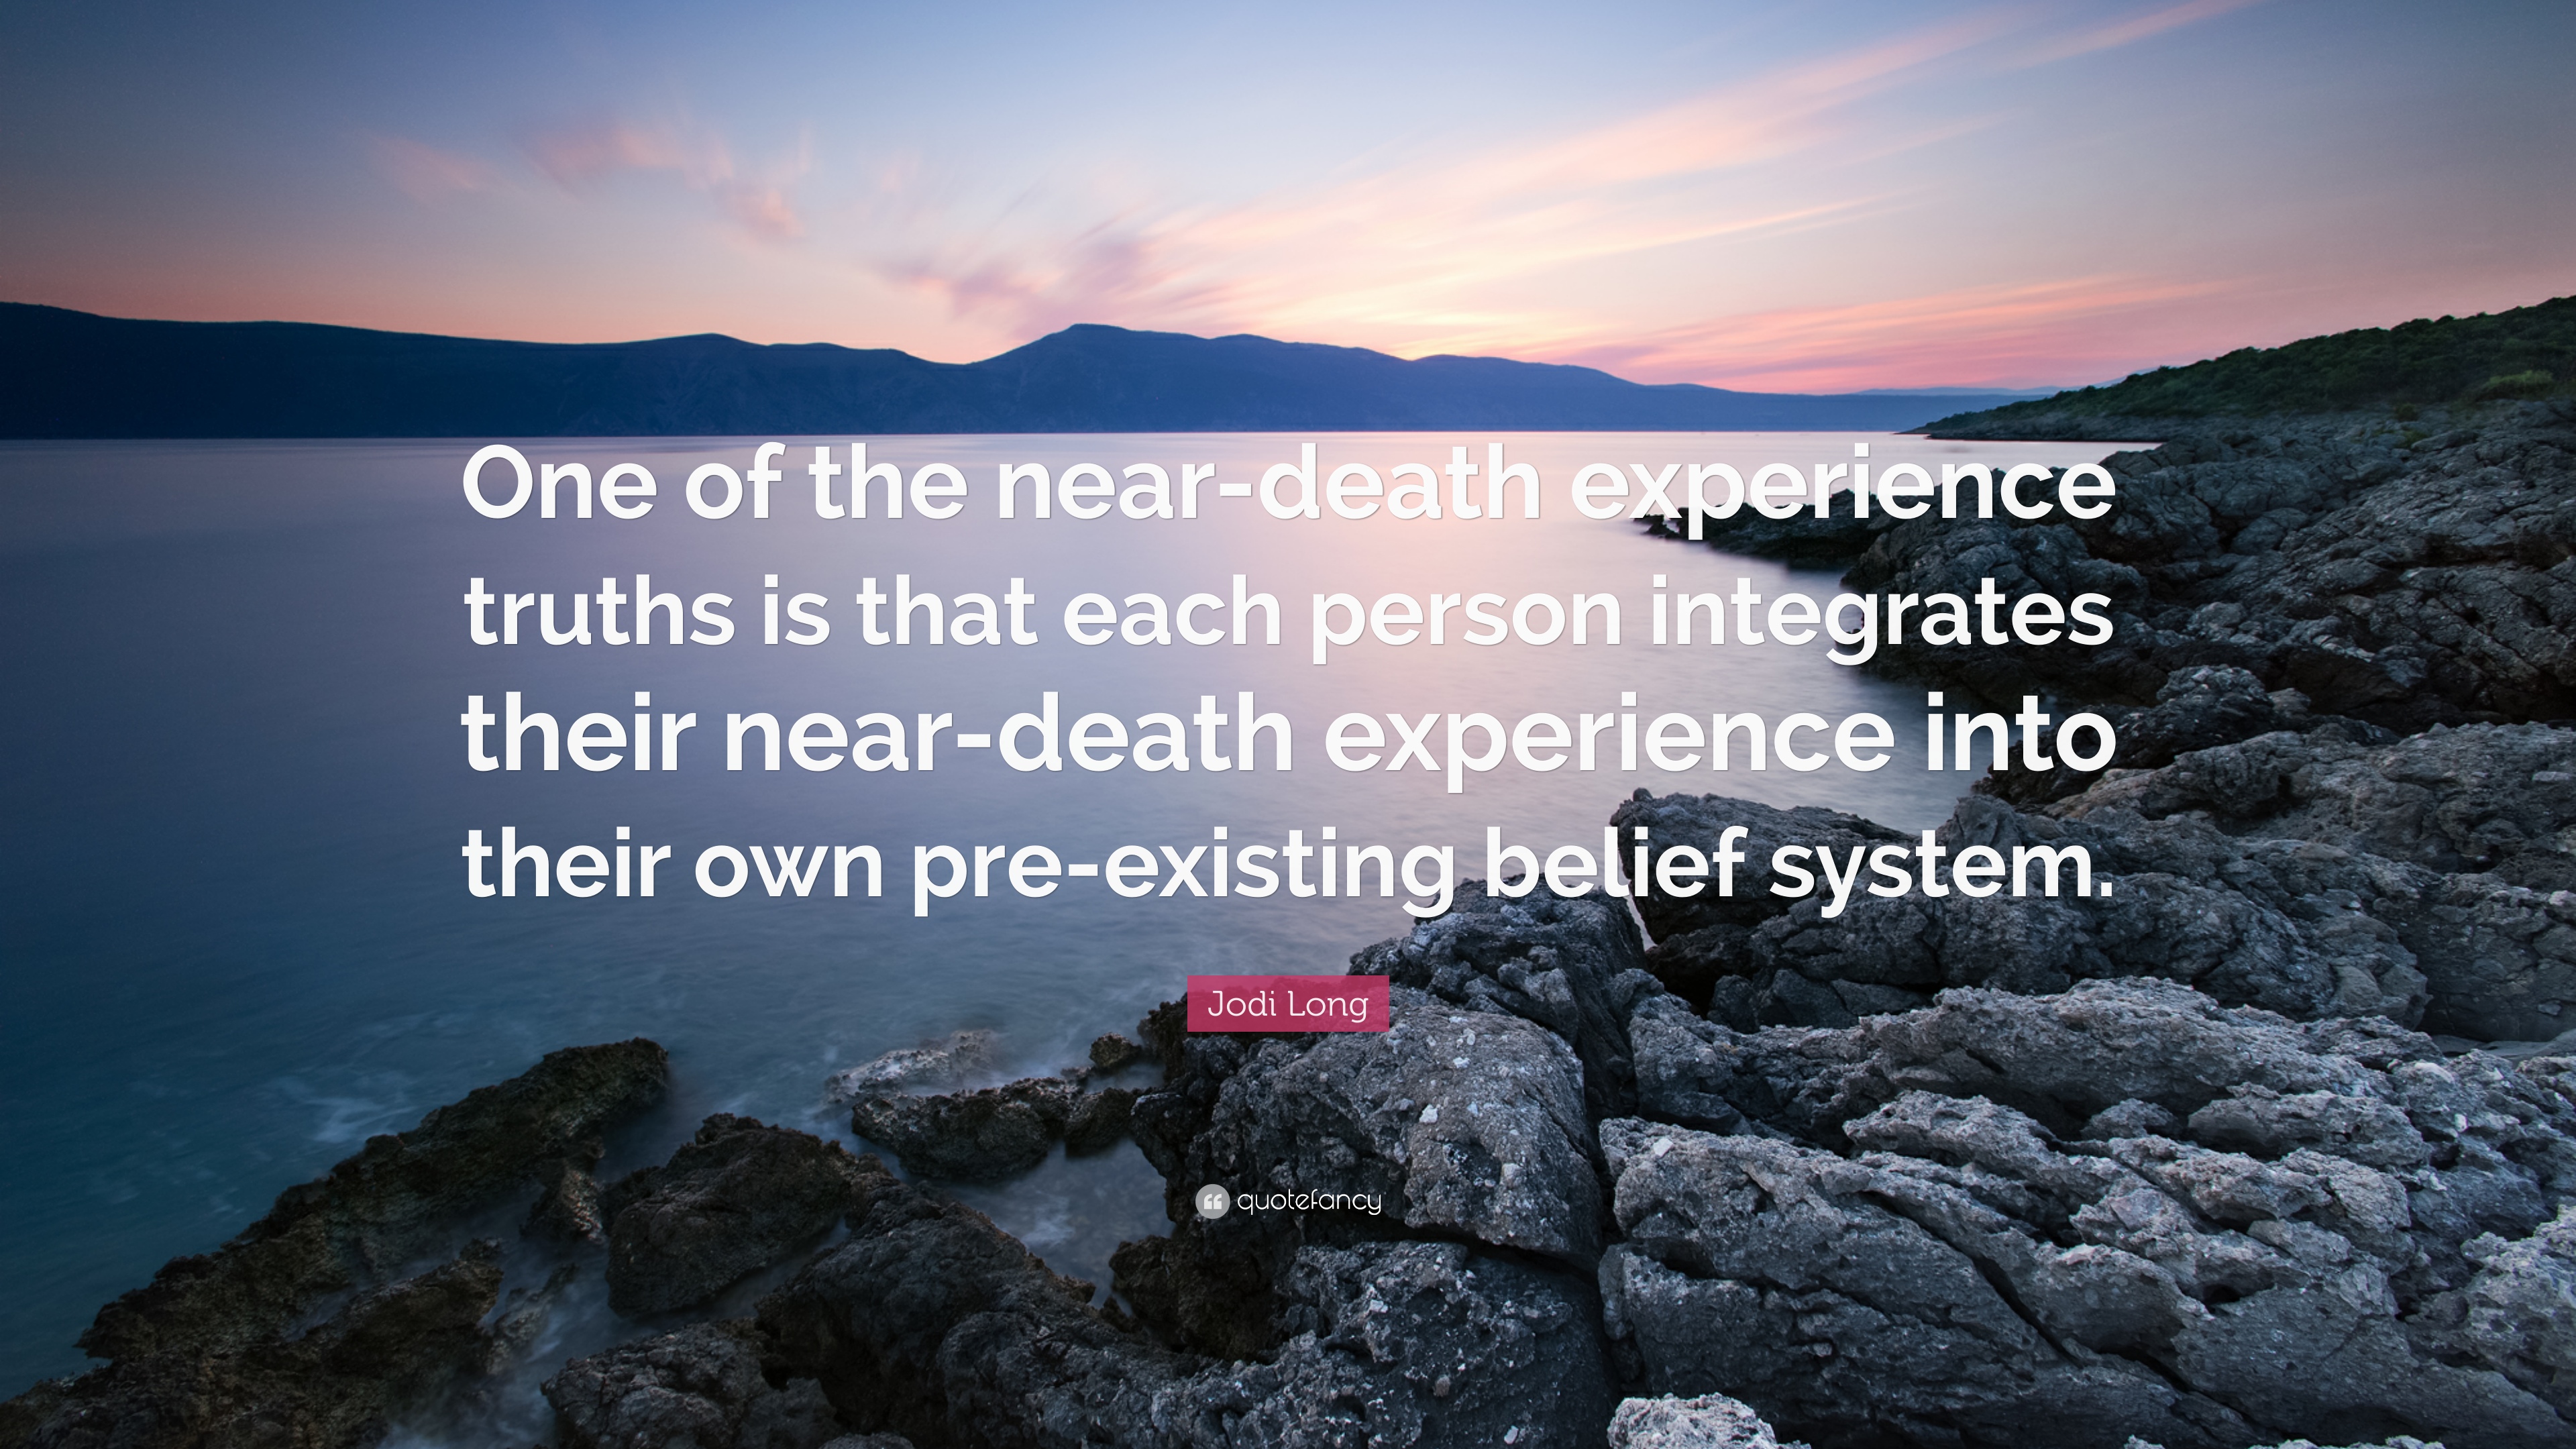 Jodi Long Quote: “One of the near-death experience truths is that ...